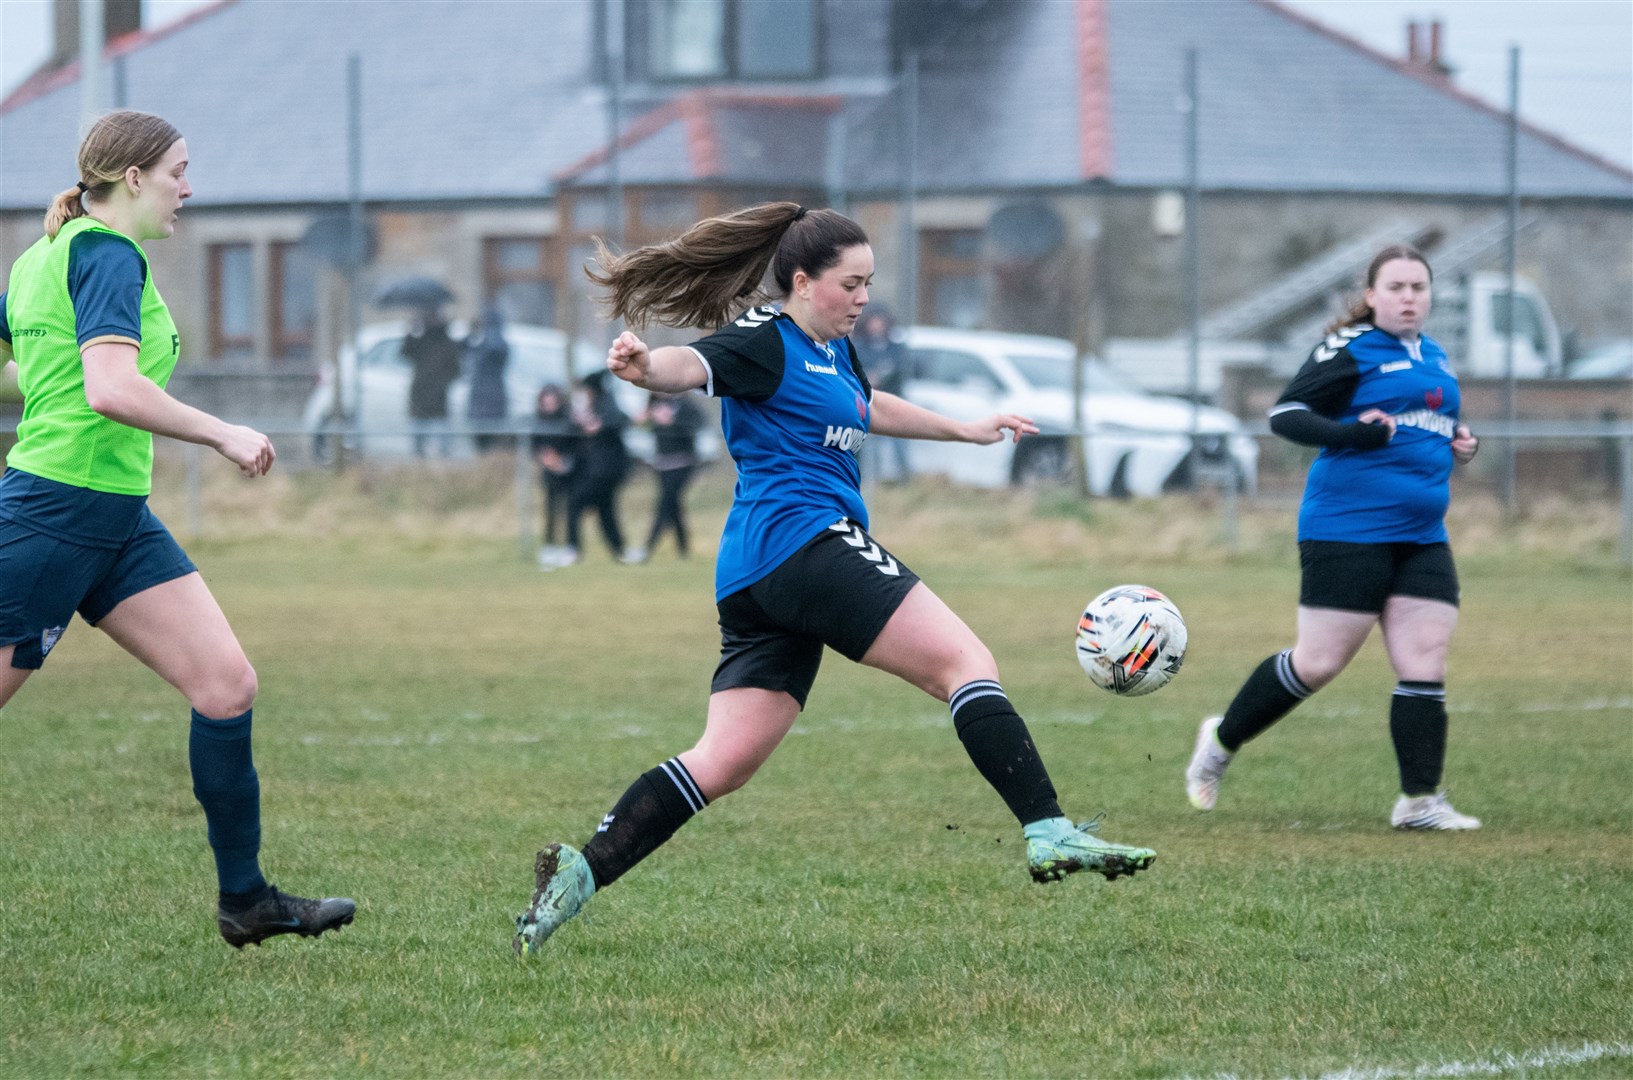 Lori Lappin claimed a double to help land Buckie all three points. Picture: Daniel Forsyth.